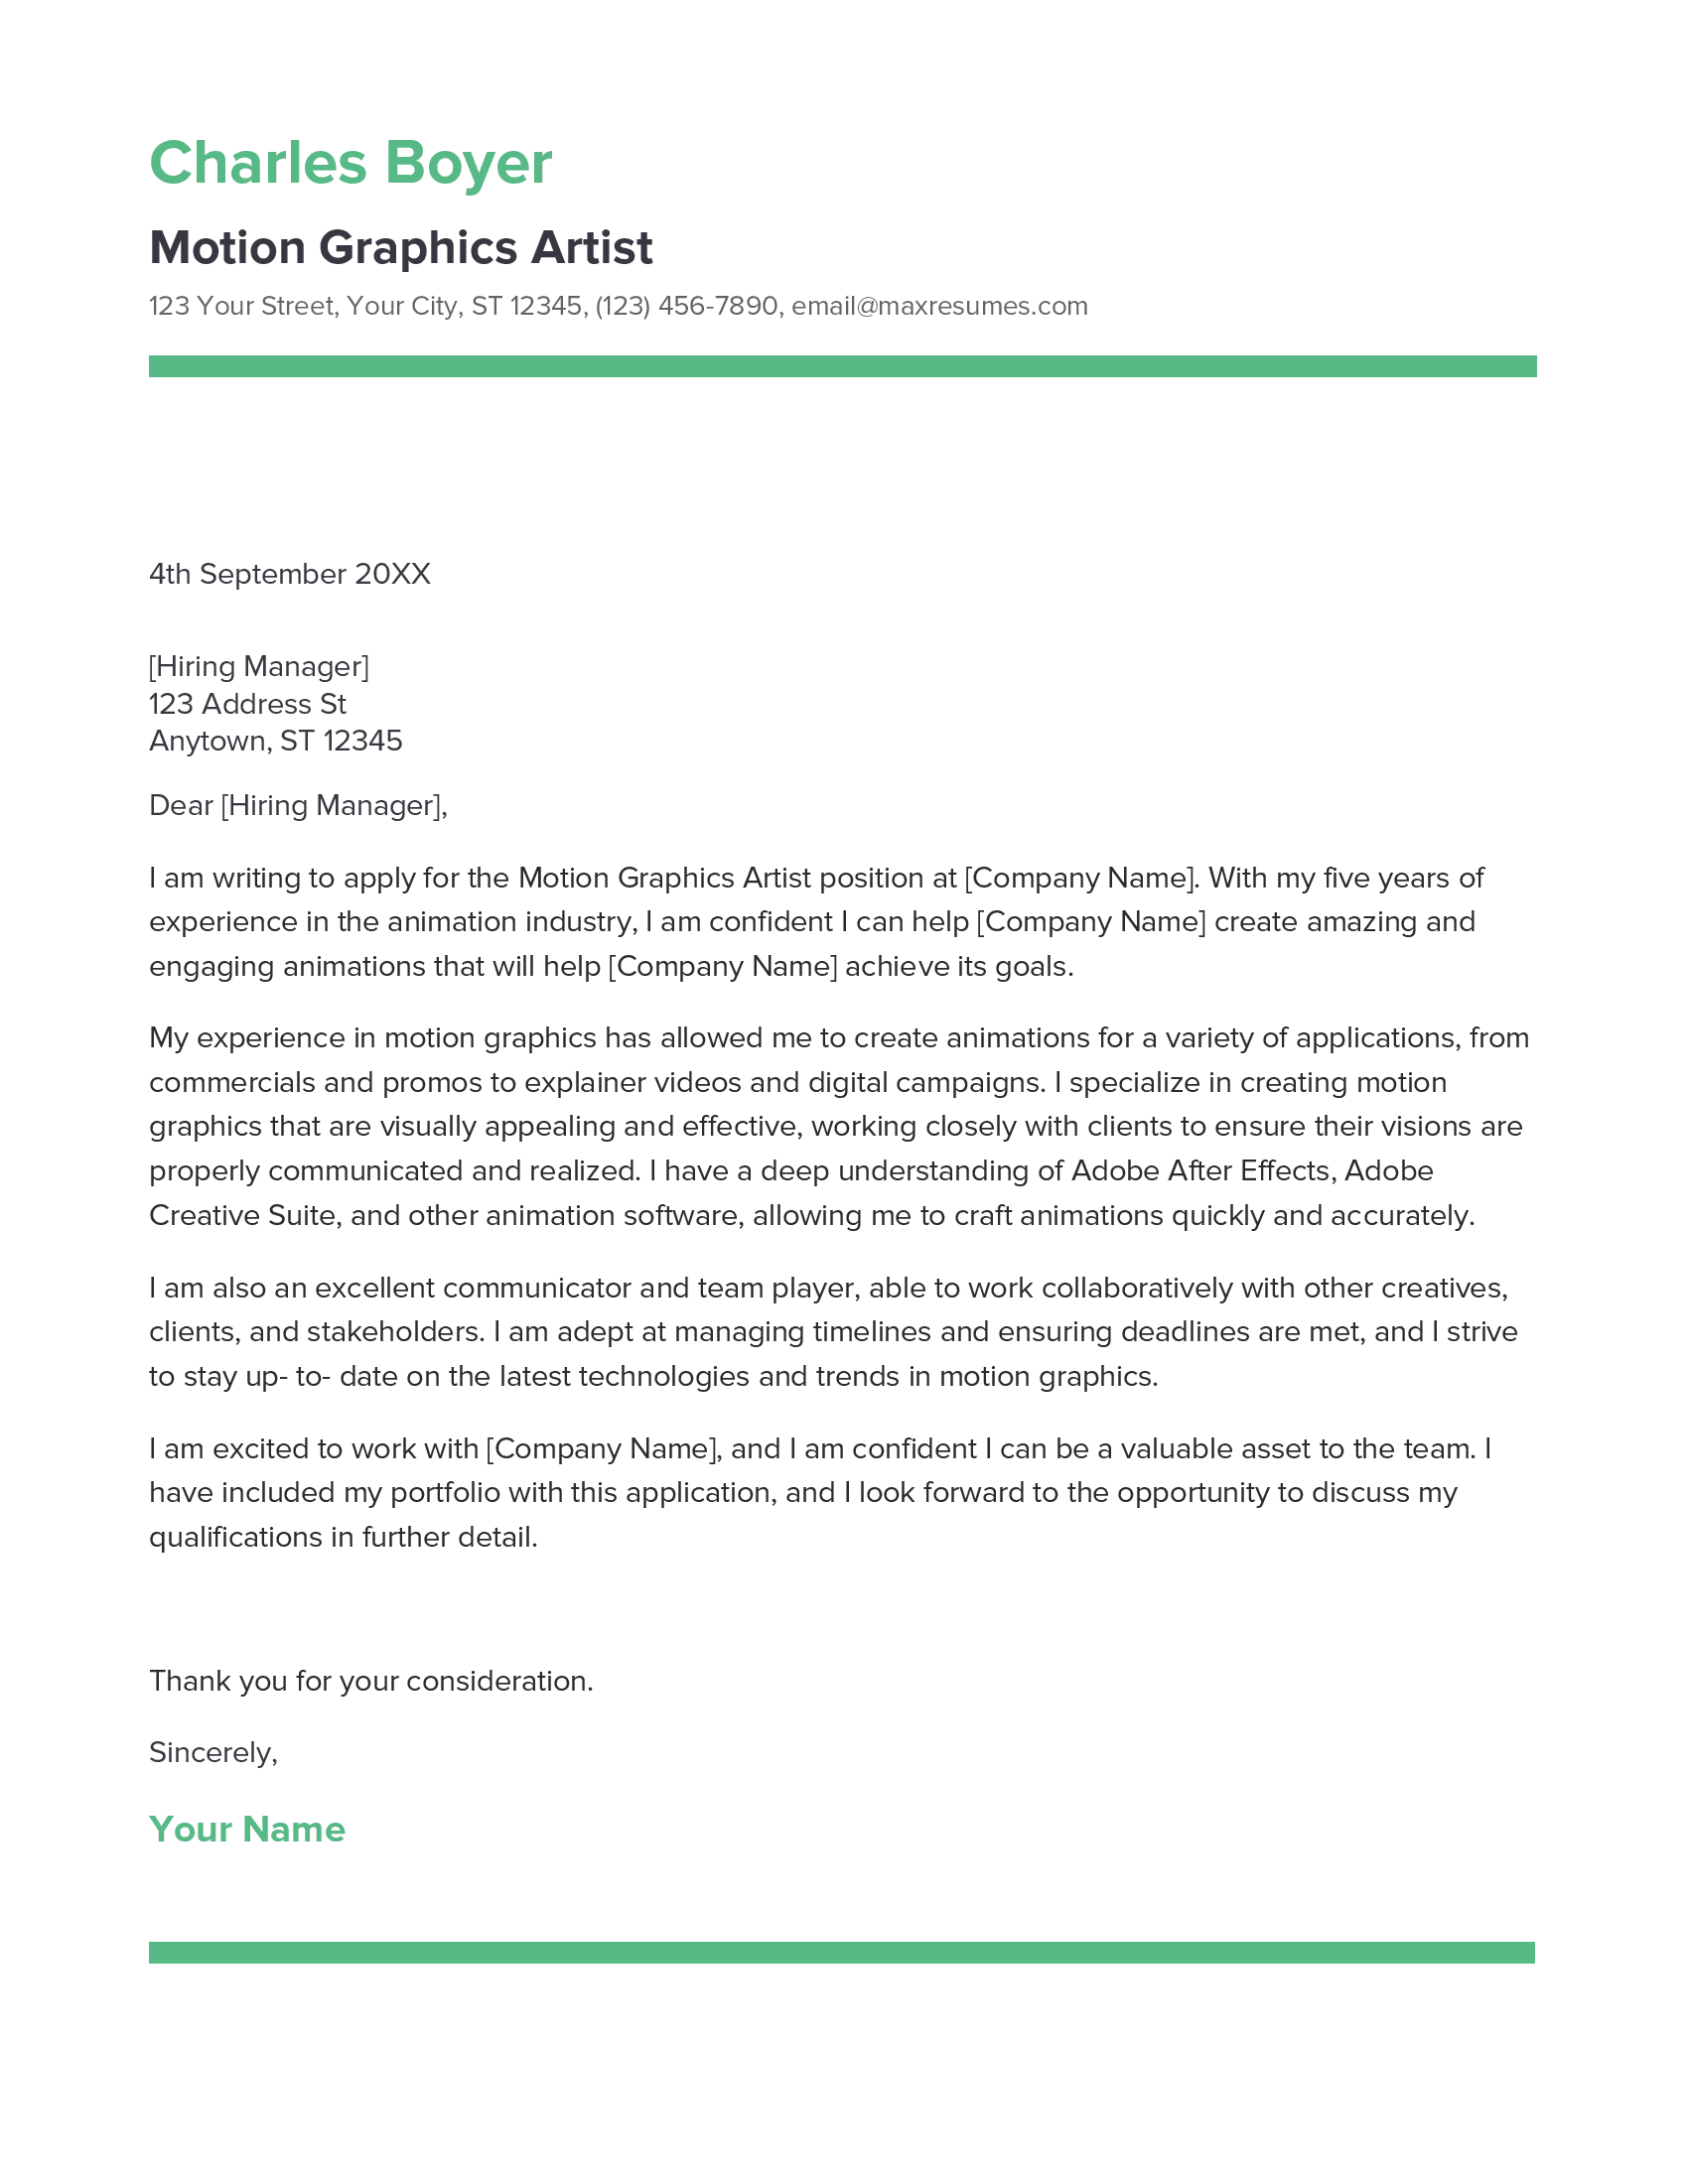 Motion Graphics Artist Cover Letter Example